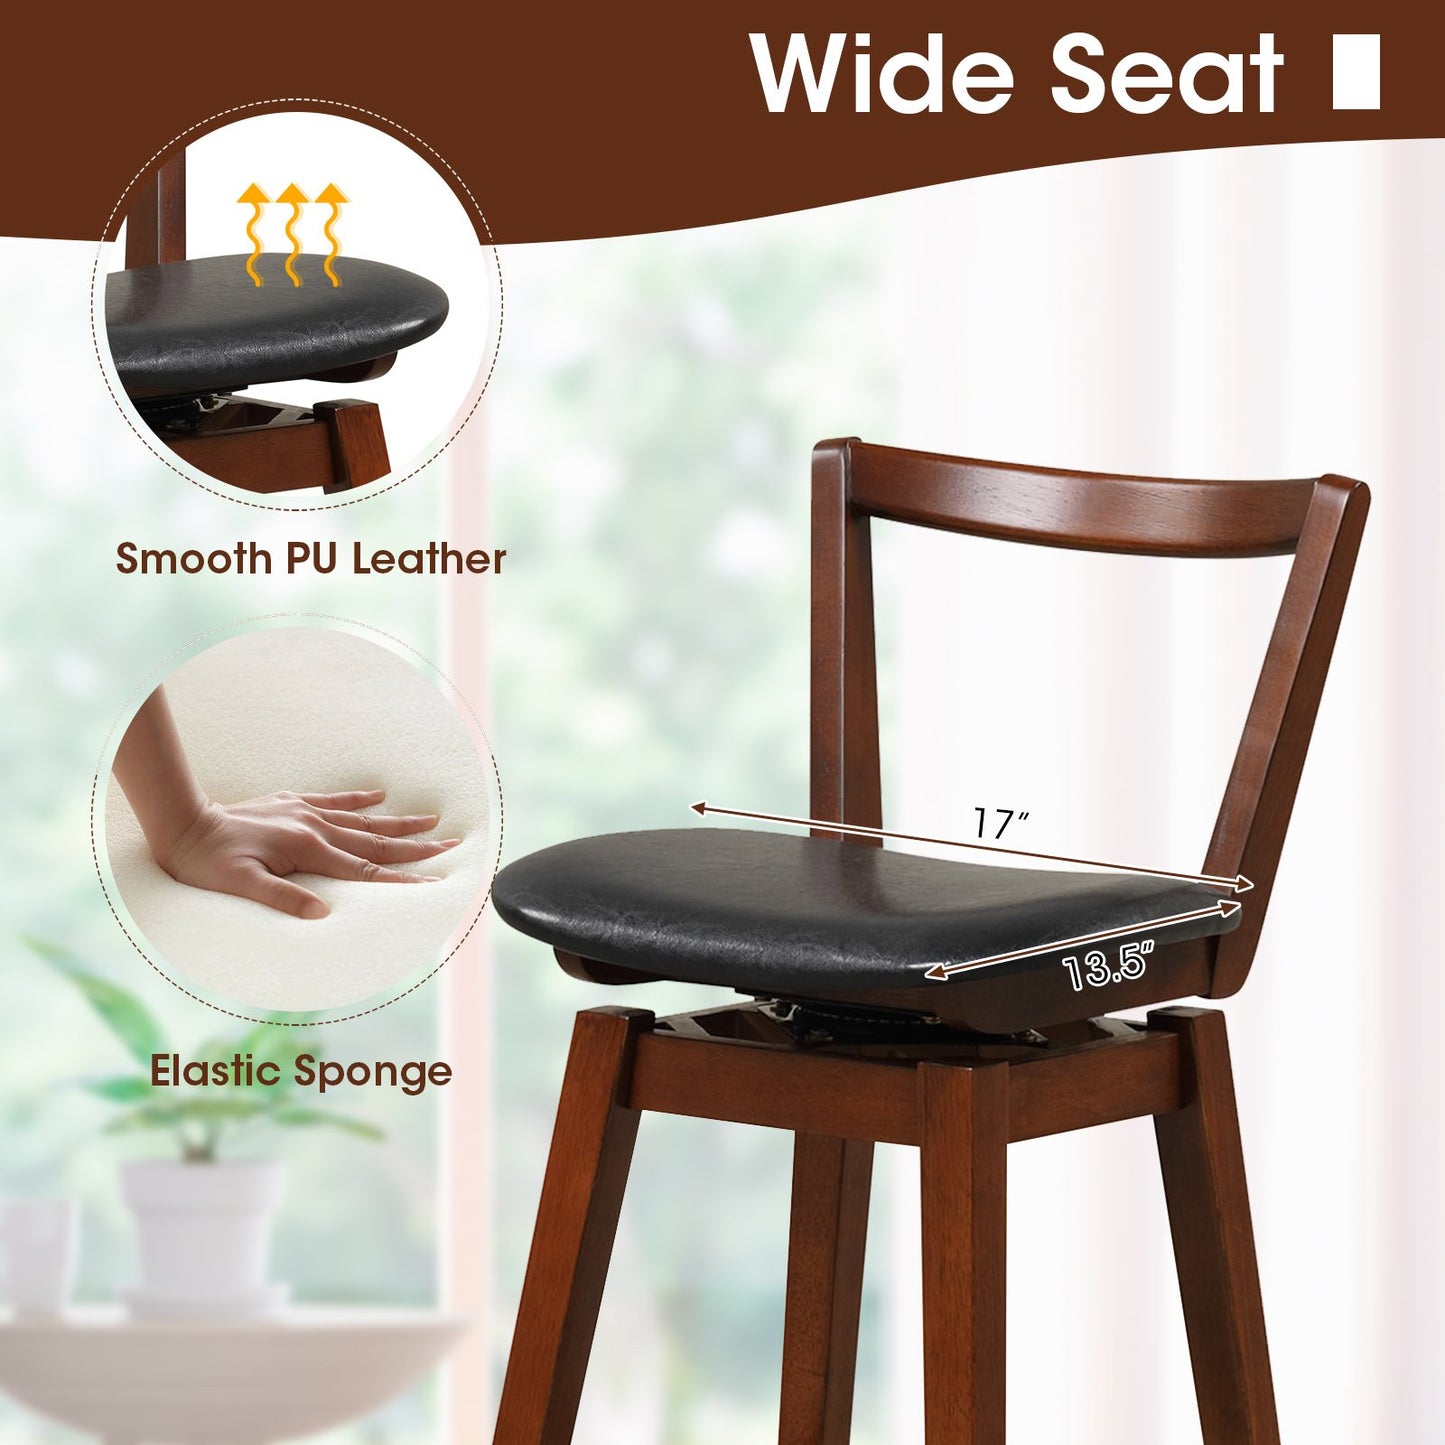 Swivel Upholstered PU Leather Stool with Backrest and Cushioned Seat-30.5 inches, Brown